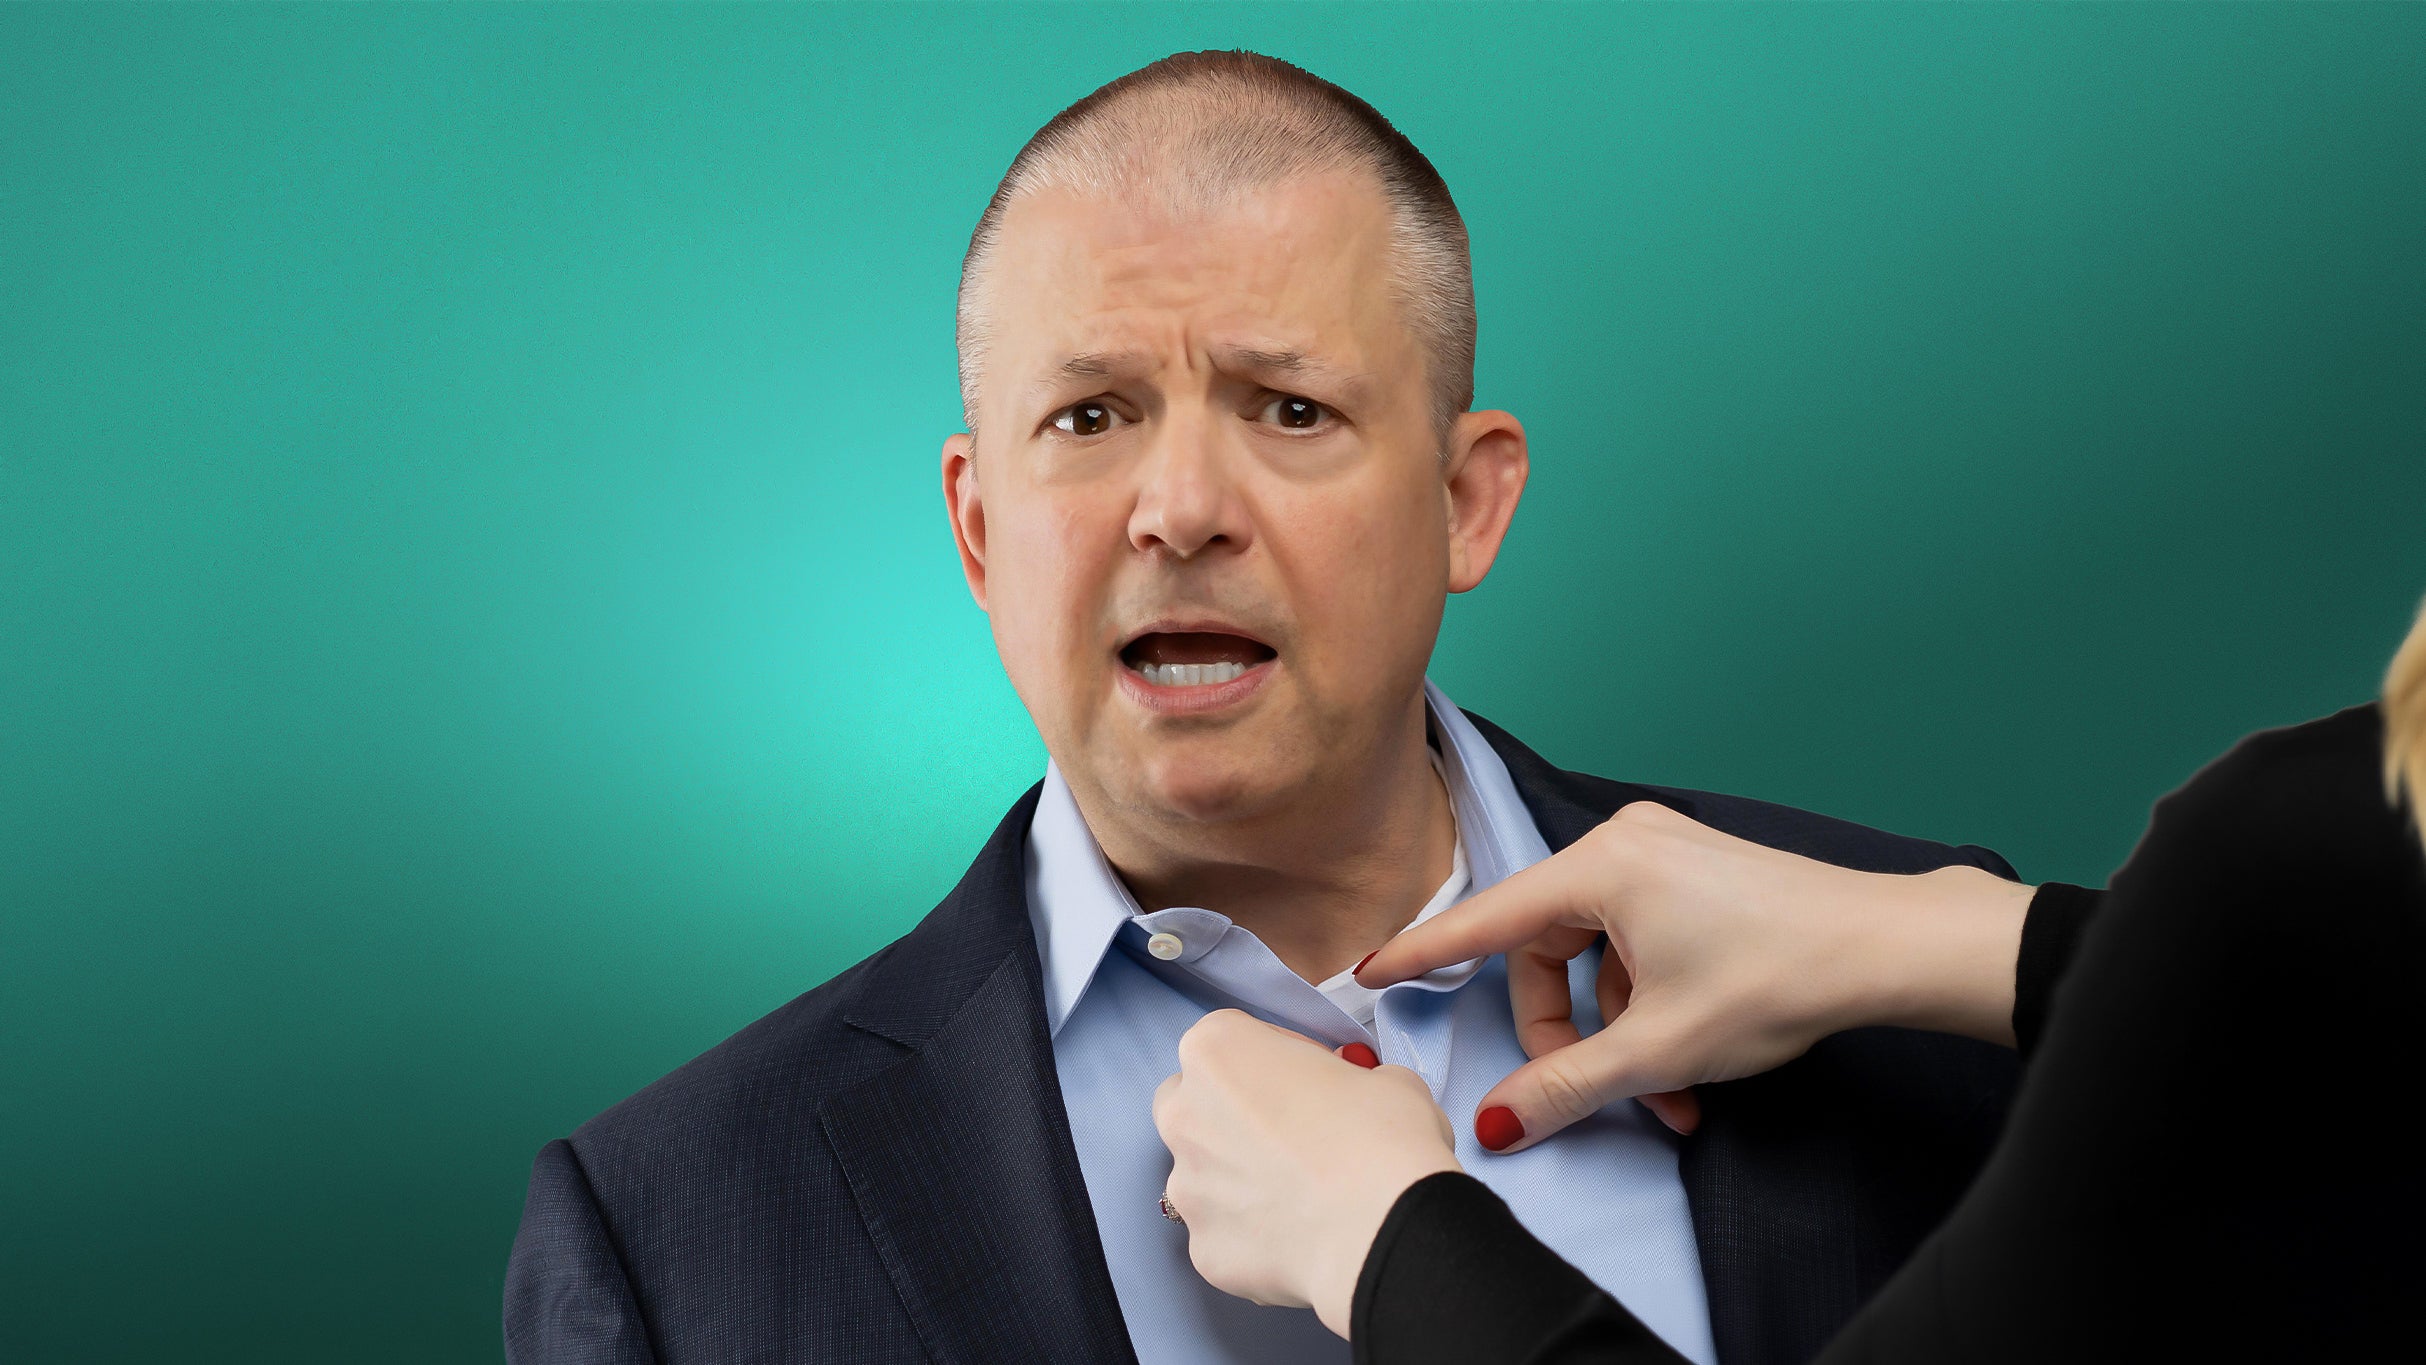 Jim Norton: Now You Know (Fully Seated 18+) presale passwords